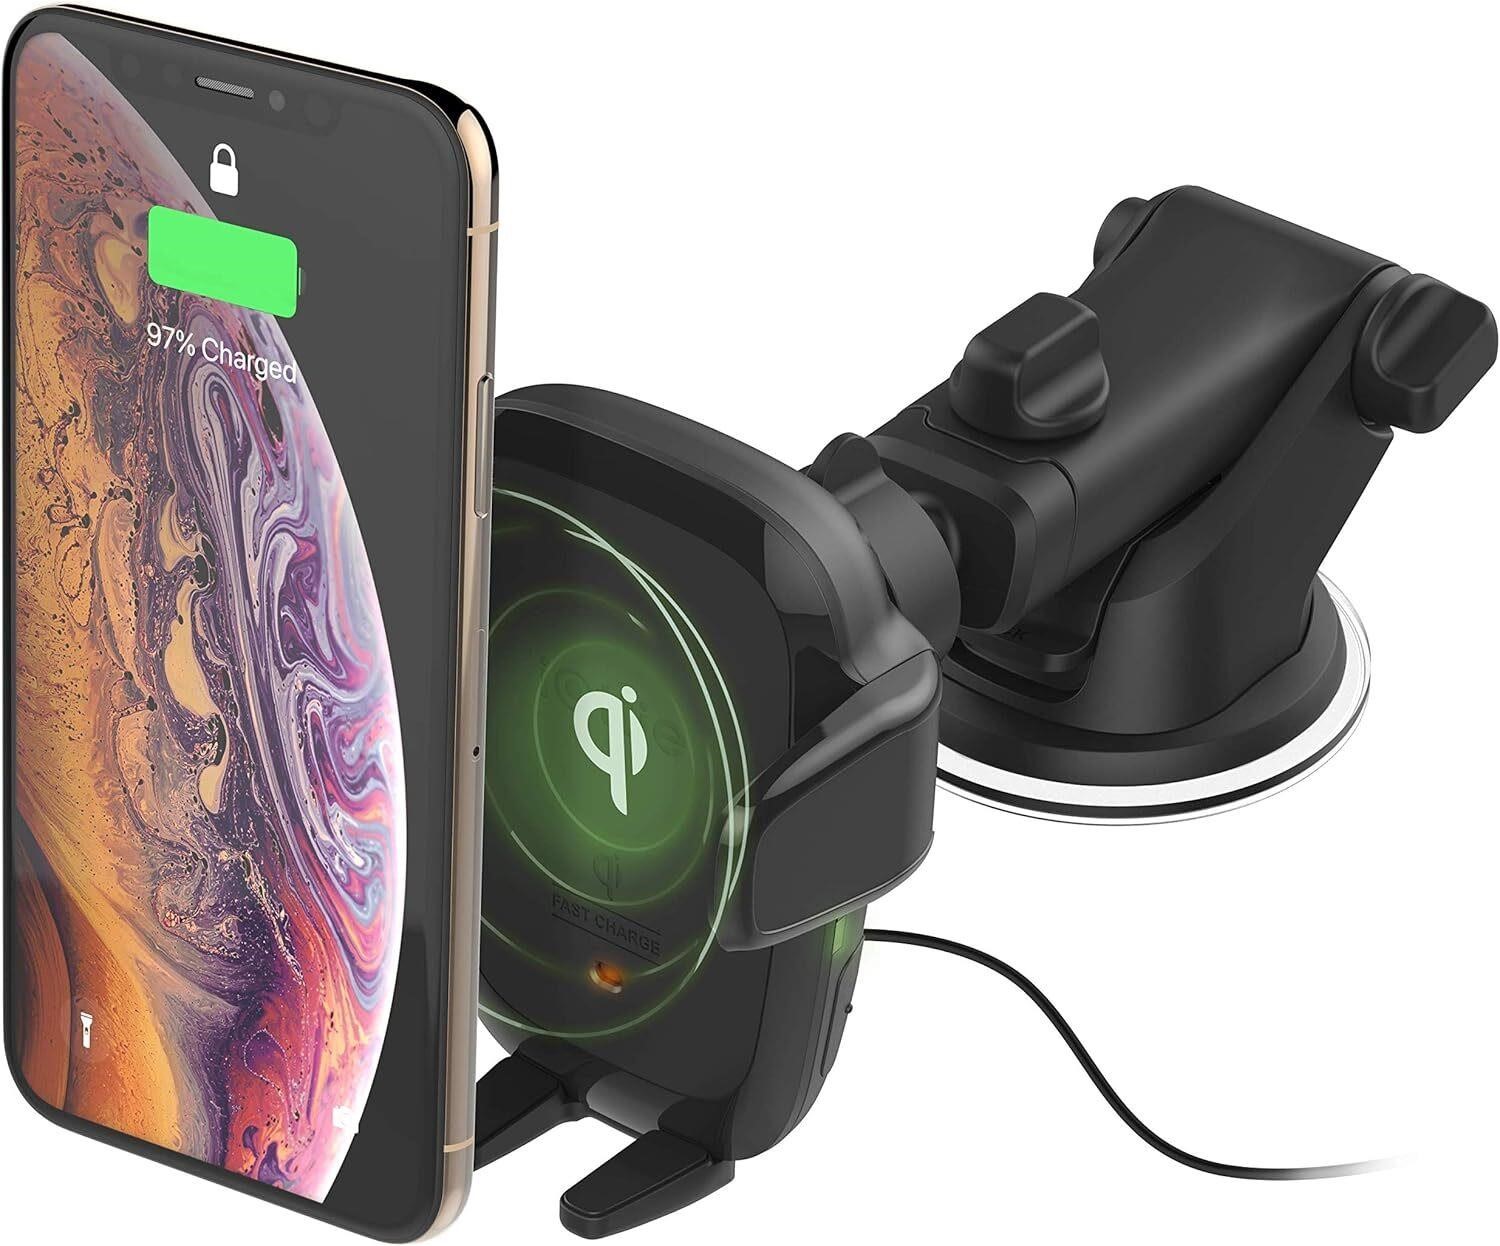 $51 Phone Mount with Wireless Charger